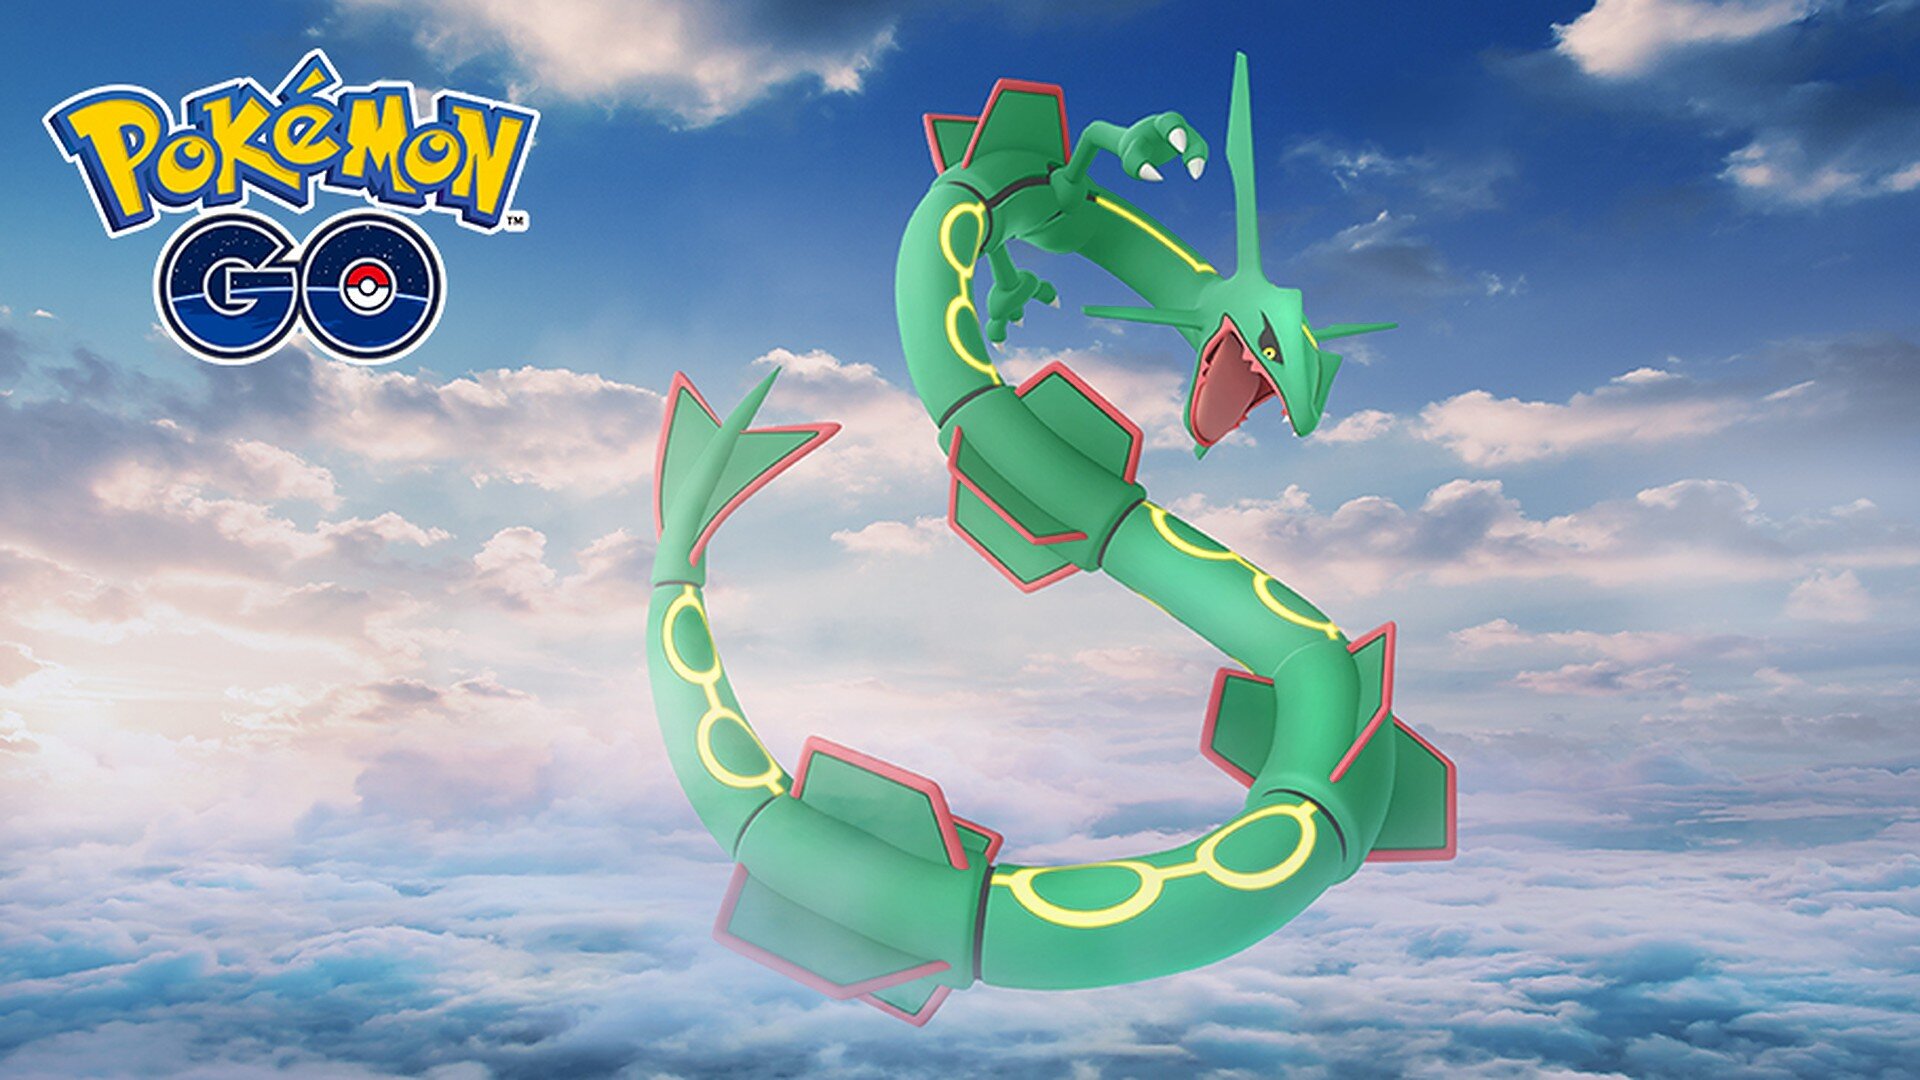 Rayquaza is one of the best flying type pokemon in pokemon go